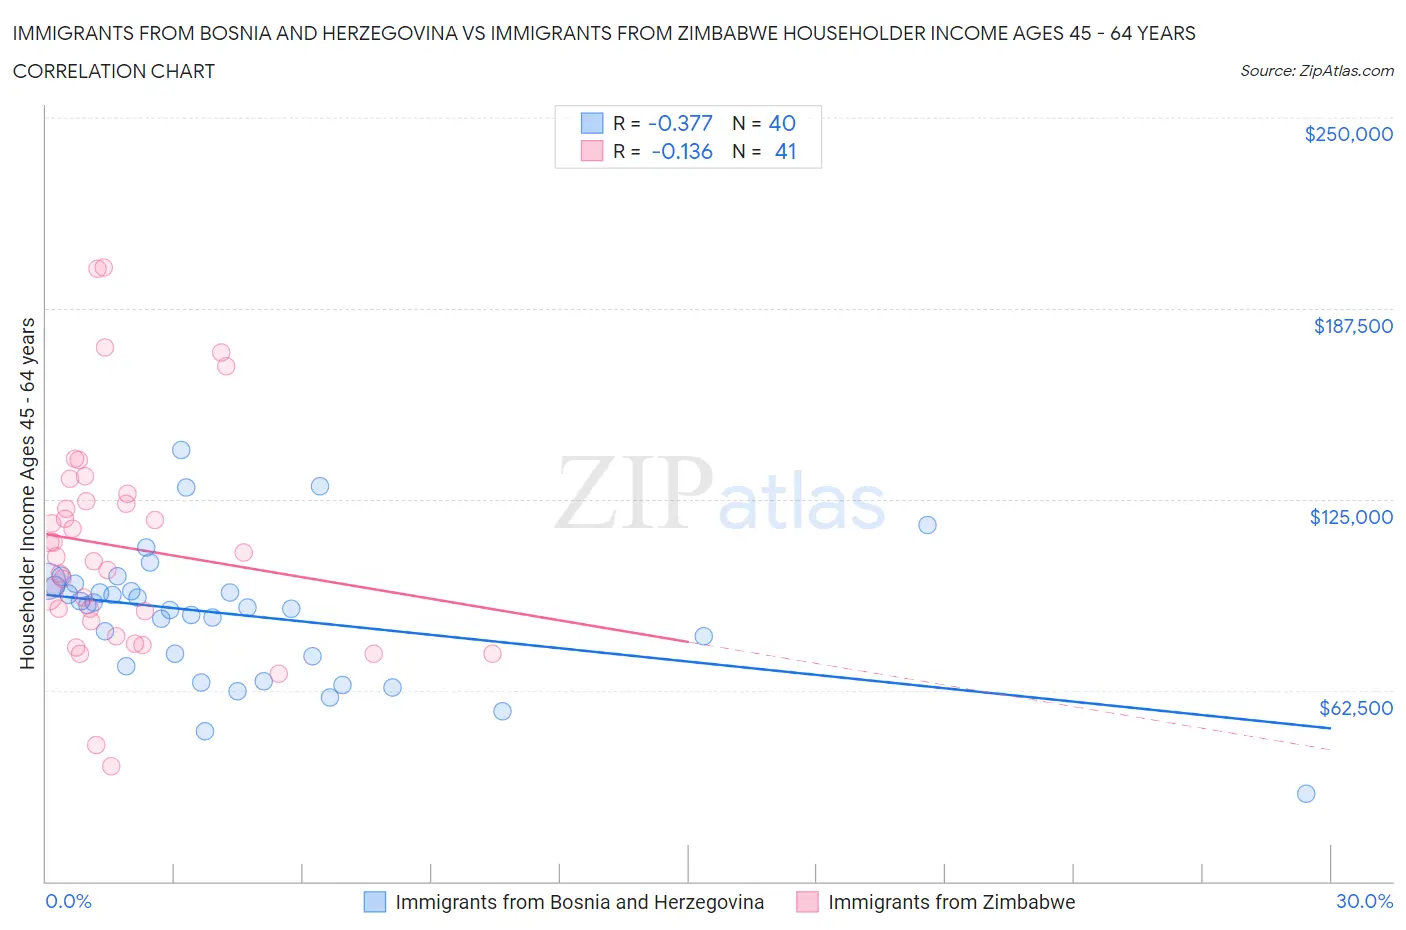 Immigrants from Bosnia and Herzegovina vs Immigrants from Zimbabwe Householder Income Ages 45 - 64 years